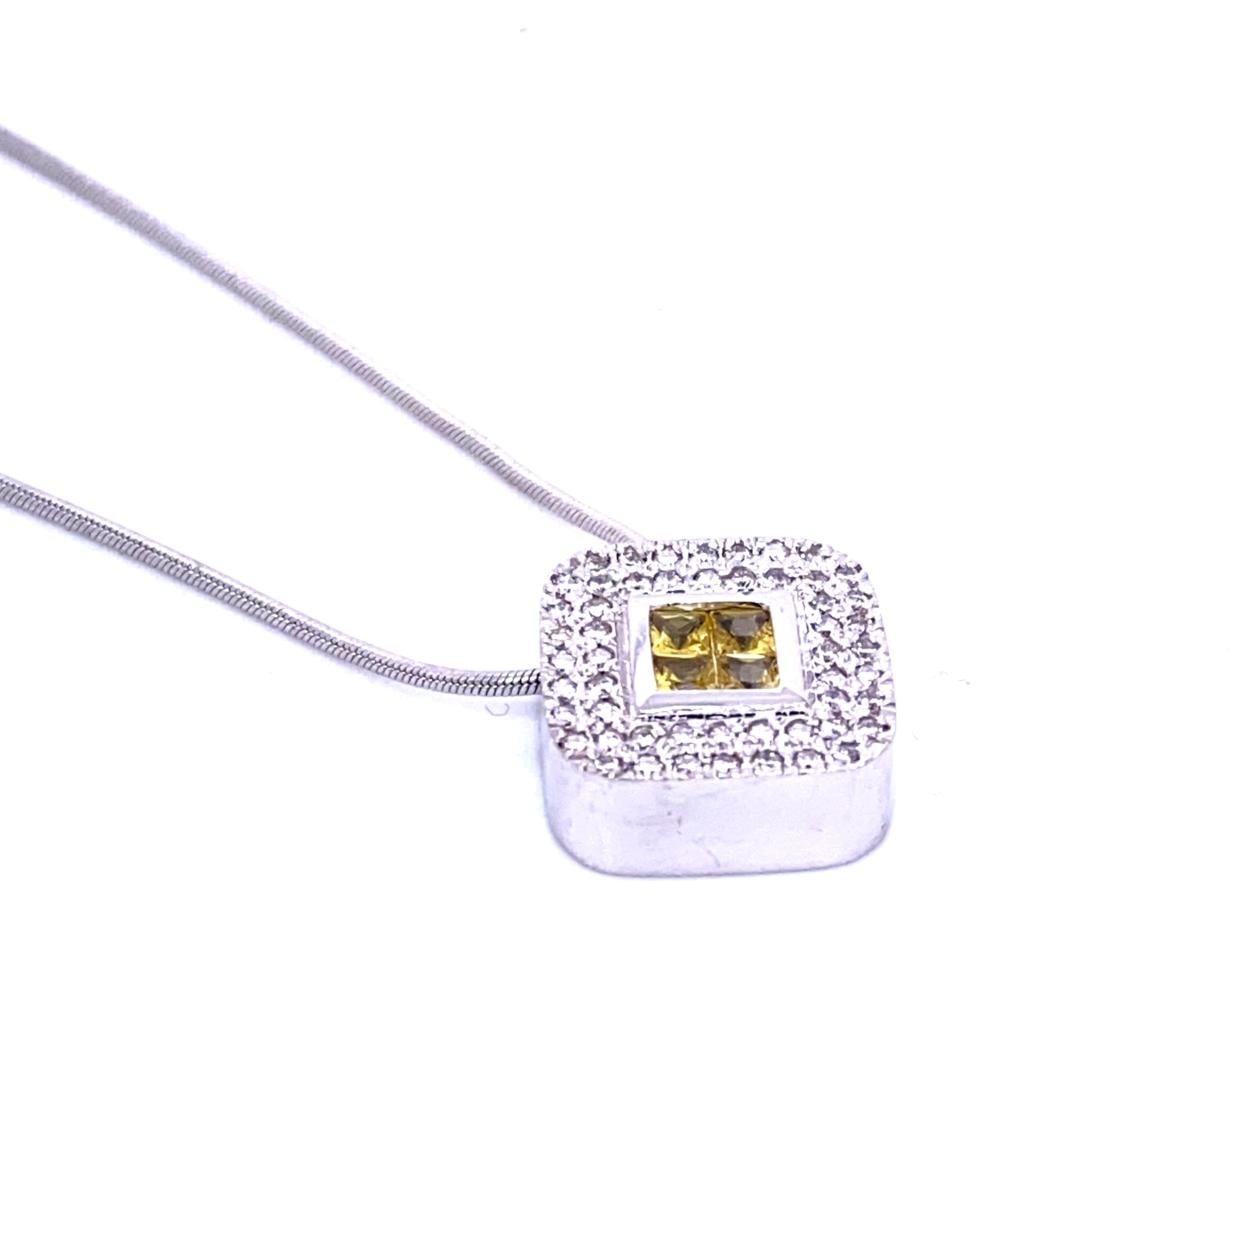 18K Gold Cushion Shape Diagonal Pendant with 4 Invisible Set Princess Cut Yellow Sapphires (Total Gem Weight 0.46 Ct) surrounded by a pave set Halo of diamonds with total weight of 0.42 Ct. The pendant is set on a 16 inch Snake chain.
Total Diamond